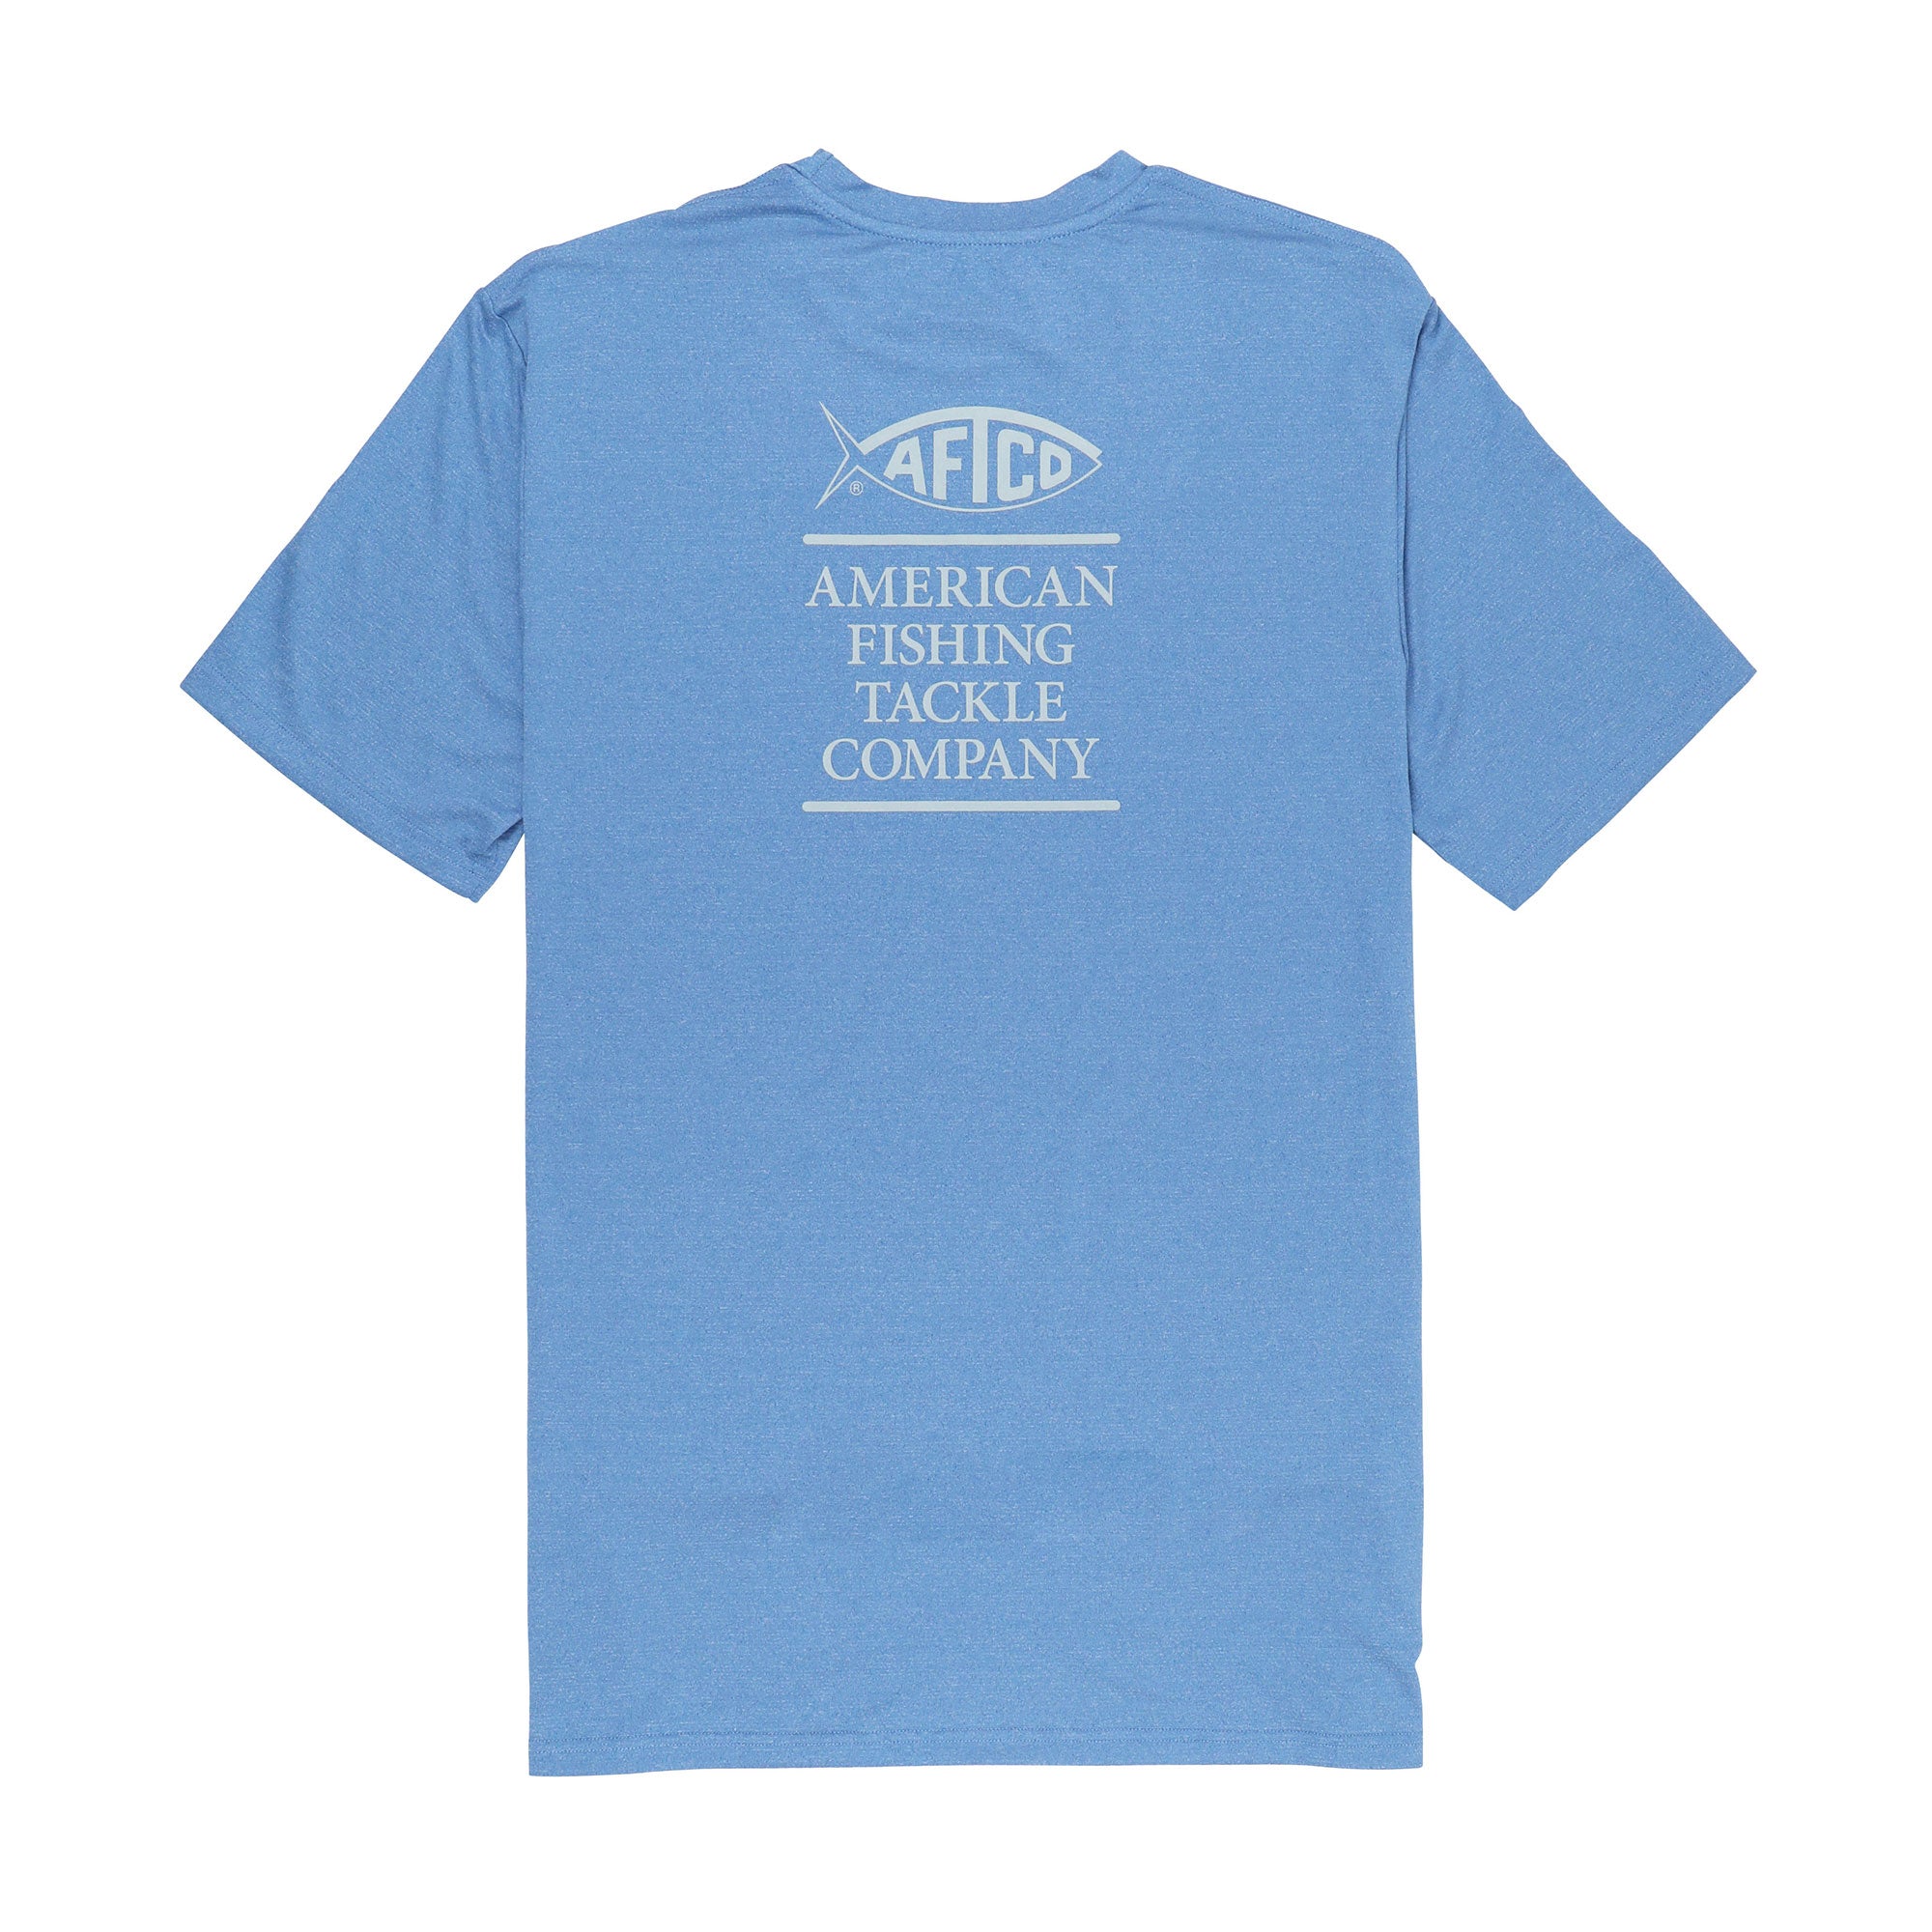 AFTCO Stax SS Performance Shirt - Nautical Blue Heather - S